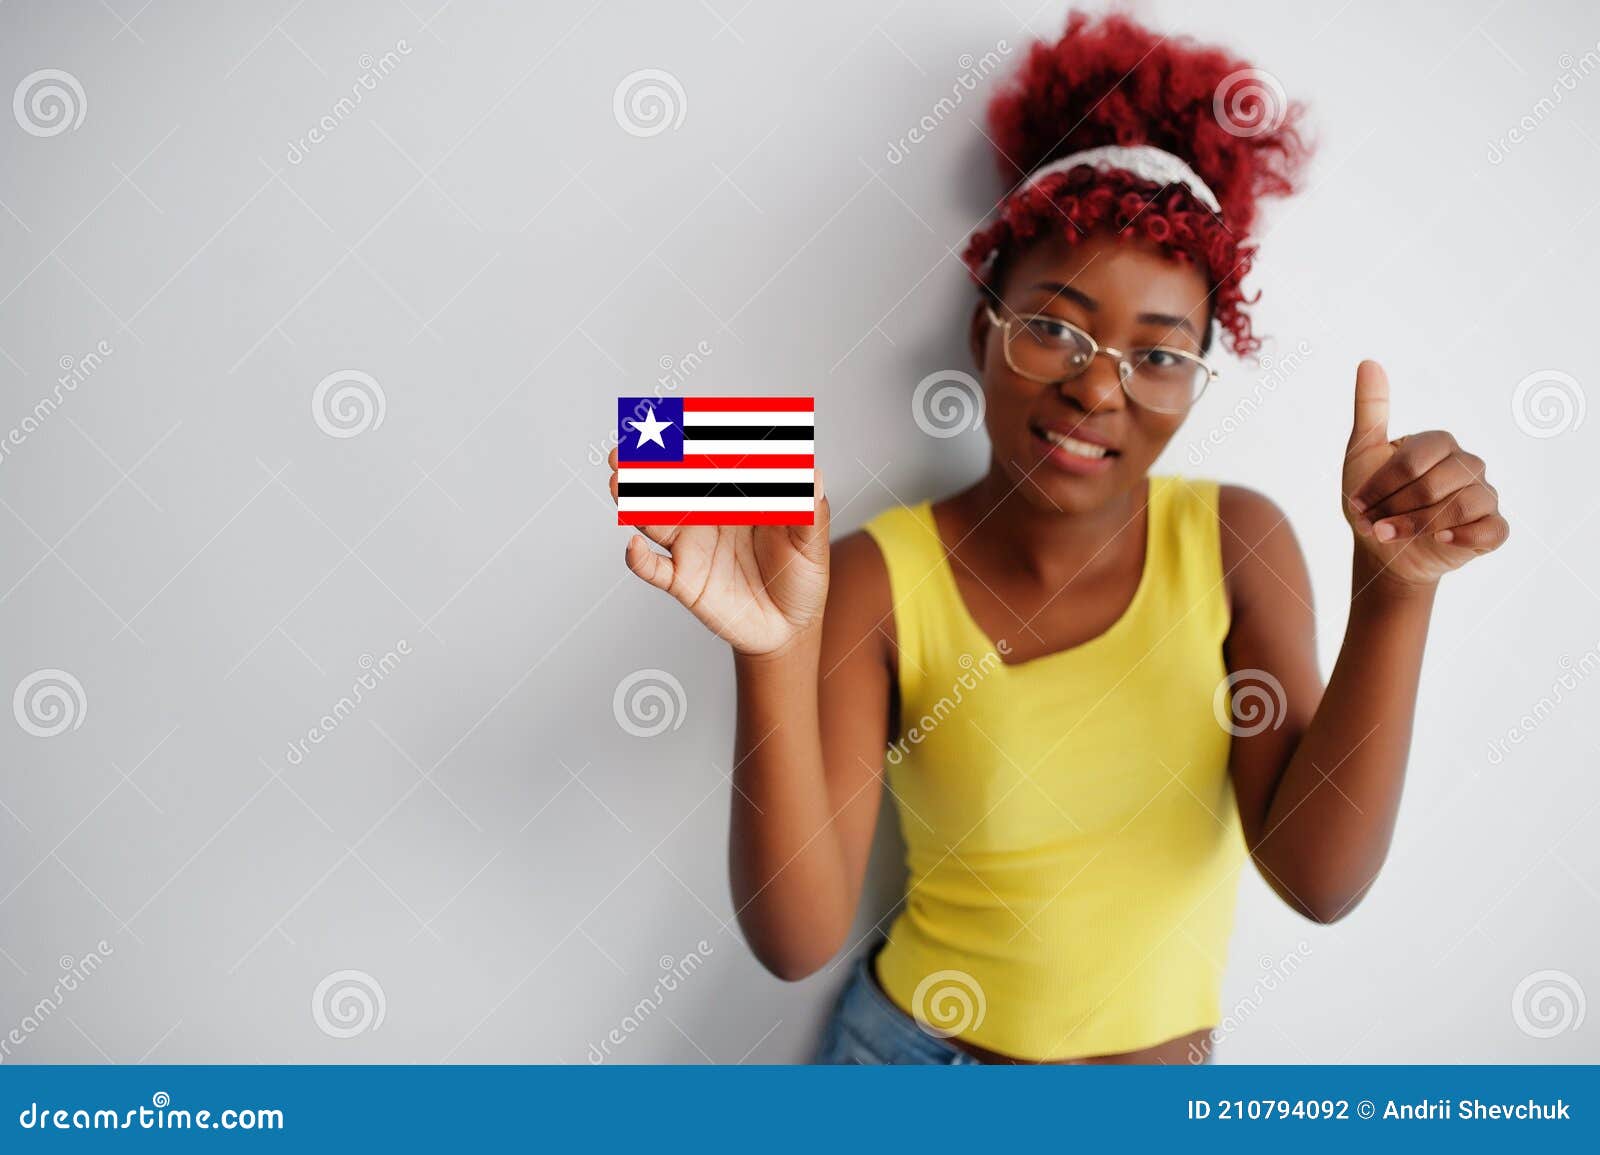 brazilian woman with afro hair hold maranhao flag  on white background, show thumb up. states of brazil concept